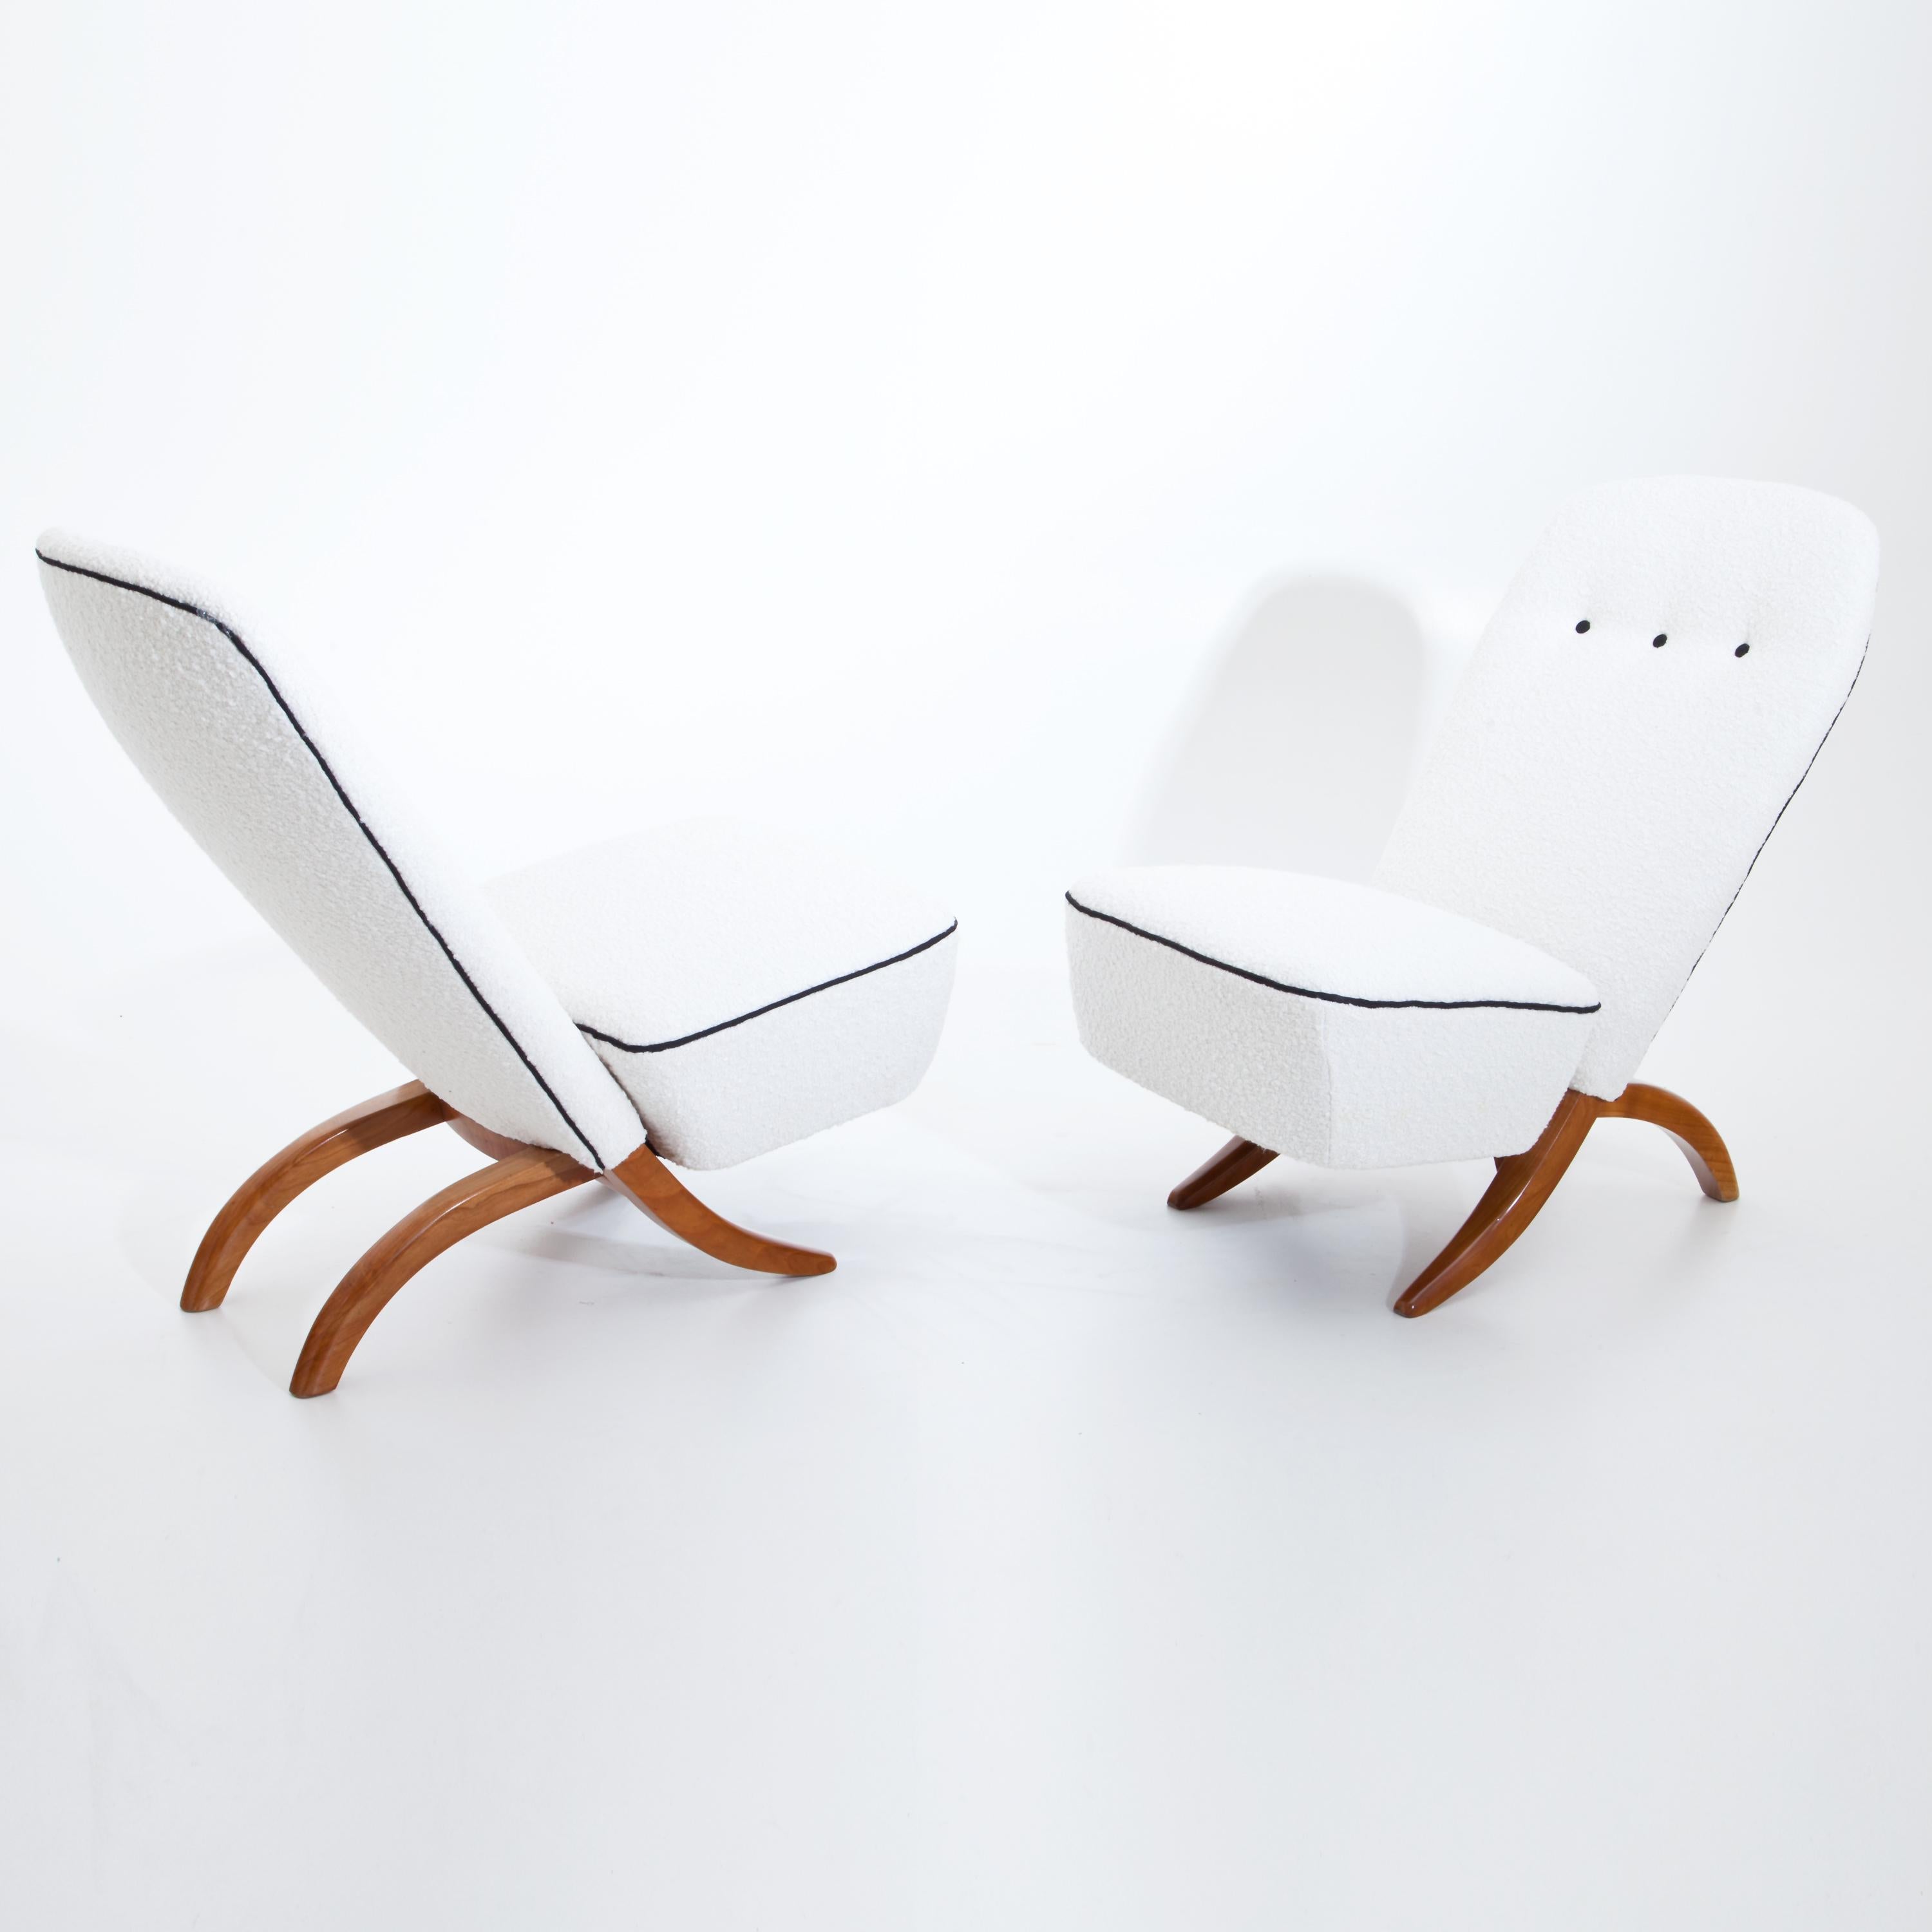 Pair of lounge chairs on curved feet out of cherry wood. The strongly inclined, rounded backrest and seat are newly covered with a white bouclé fabric with black piping and buttons.